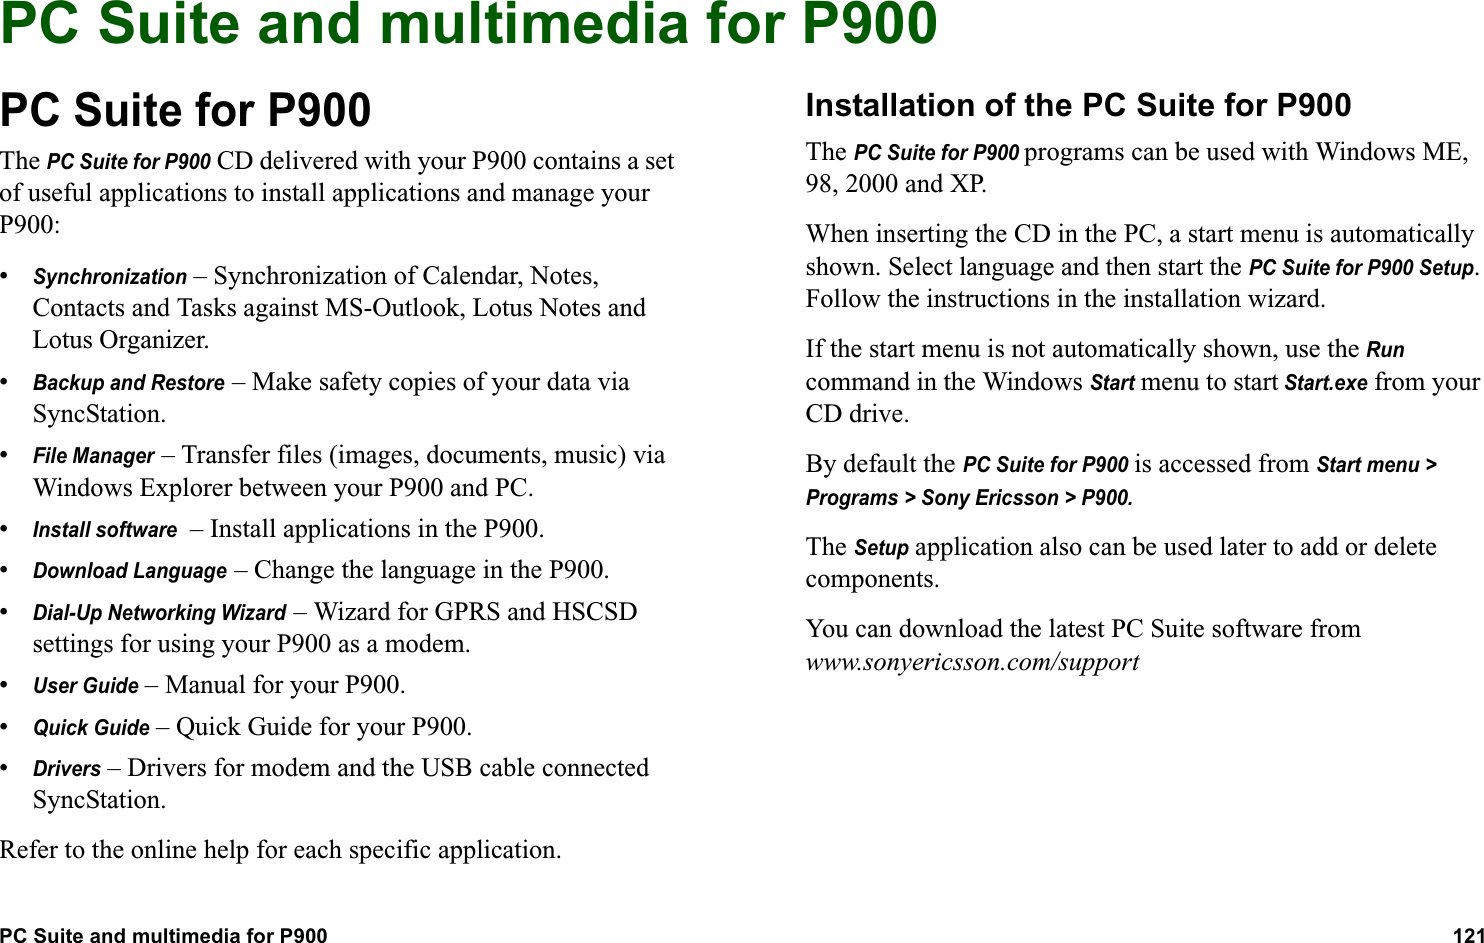 PC Suite and multimedia for P900 121  ADVANCED FUNCTIONSPC Suite and multimedia for P900PC Suite for P900The PC Suite for P900 CD delivered with your P900 contains a set of useful applications to install applications and manage your P900:•Synchronization – Synchronization of Calendar, Notes, Contacts and Tasks against MS-Outlook, Lotus Notes and Lotus Organizer.•Backup and Restore – Make safety copies of your data via SyncStation.•File Manager – Transfer files (images, documents, music) via Windows Explorer between your P900 and PC.•Install software  – Install applications in the P900.•Download Language – Change the language in the P900.•Dial-Up Networking Wizard – Wizard for GPRS and HSCSD settings for using your P900 as a modem.•User Guide – Manual for your P900.•Quick Guide – Quick Guide for your P900.•Drivers – Drivers for modem and the USB cable connected SyncStation.Refer to the online help for each specific application.Installation of the PC Suite for P900The PC Suite for P900 programs can be used with Windows ME, 98, 2000 and XP.When inserting the CD in the PC, a start menu is automatically shown. Select language and then start the PC Suite for P900 Setup. Follow the instructions in the installation wizard.If the start menu is not automatically shown, use the Run command in the Windows Start menu to start Start.exe from your CD drive.By default the PC Suite for P900 is accessed from Start menu &gt; Programs &gt; Sony Ericsson &gt; P900.The Setup application also can be used later to add or delete components.You can download the latest PC Suite software from www.sonyericsson.com/support 